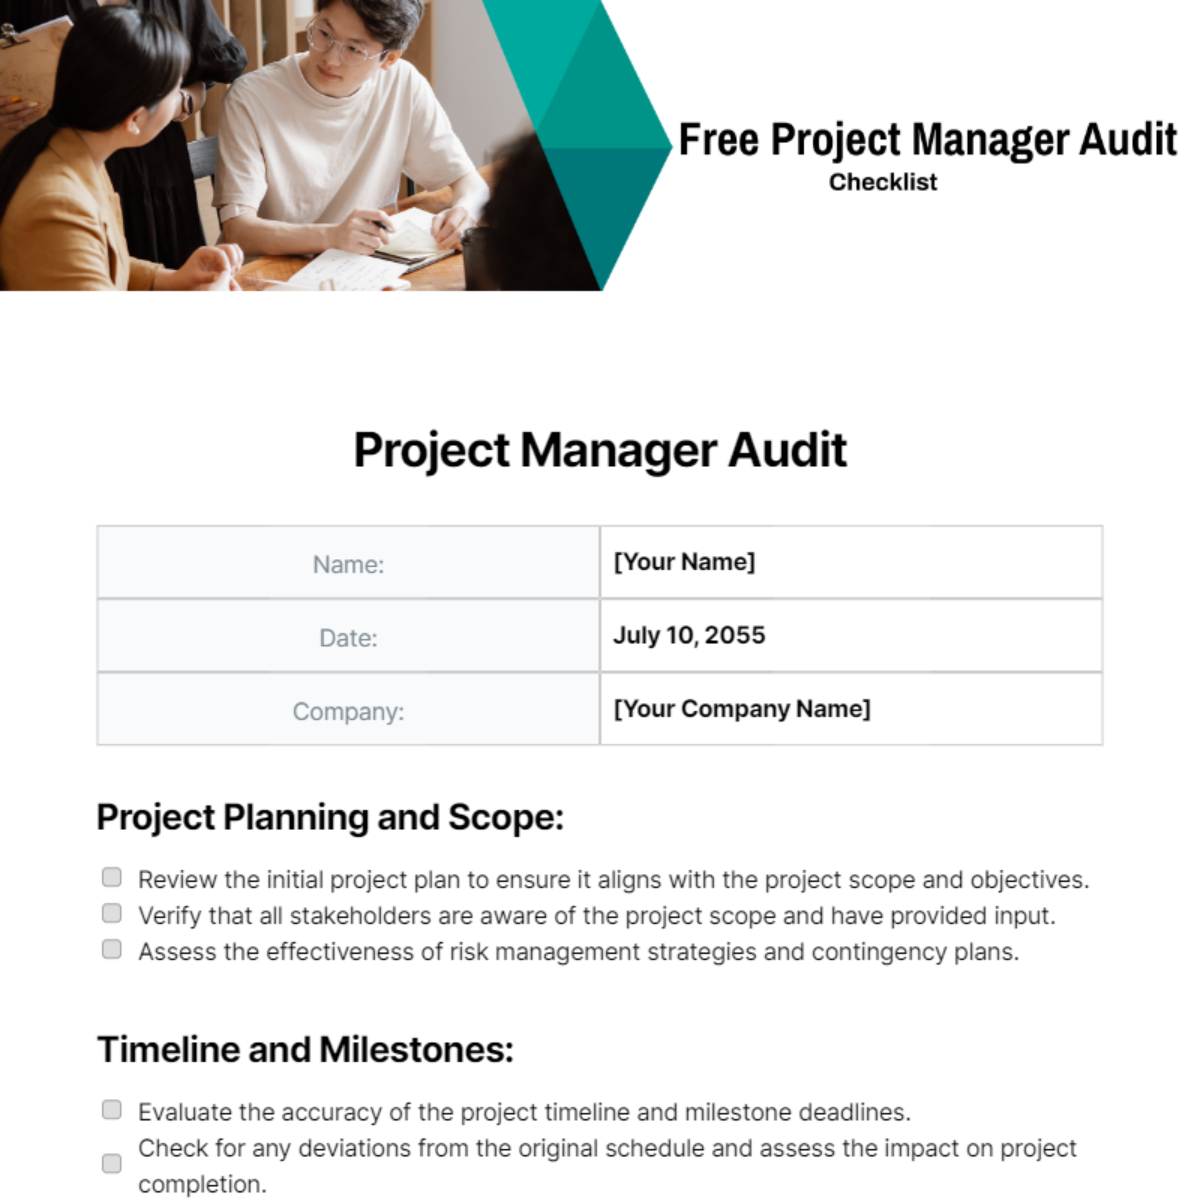 Project Manager Audit Checklist Template